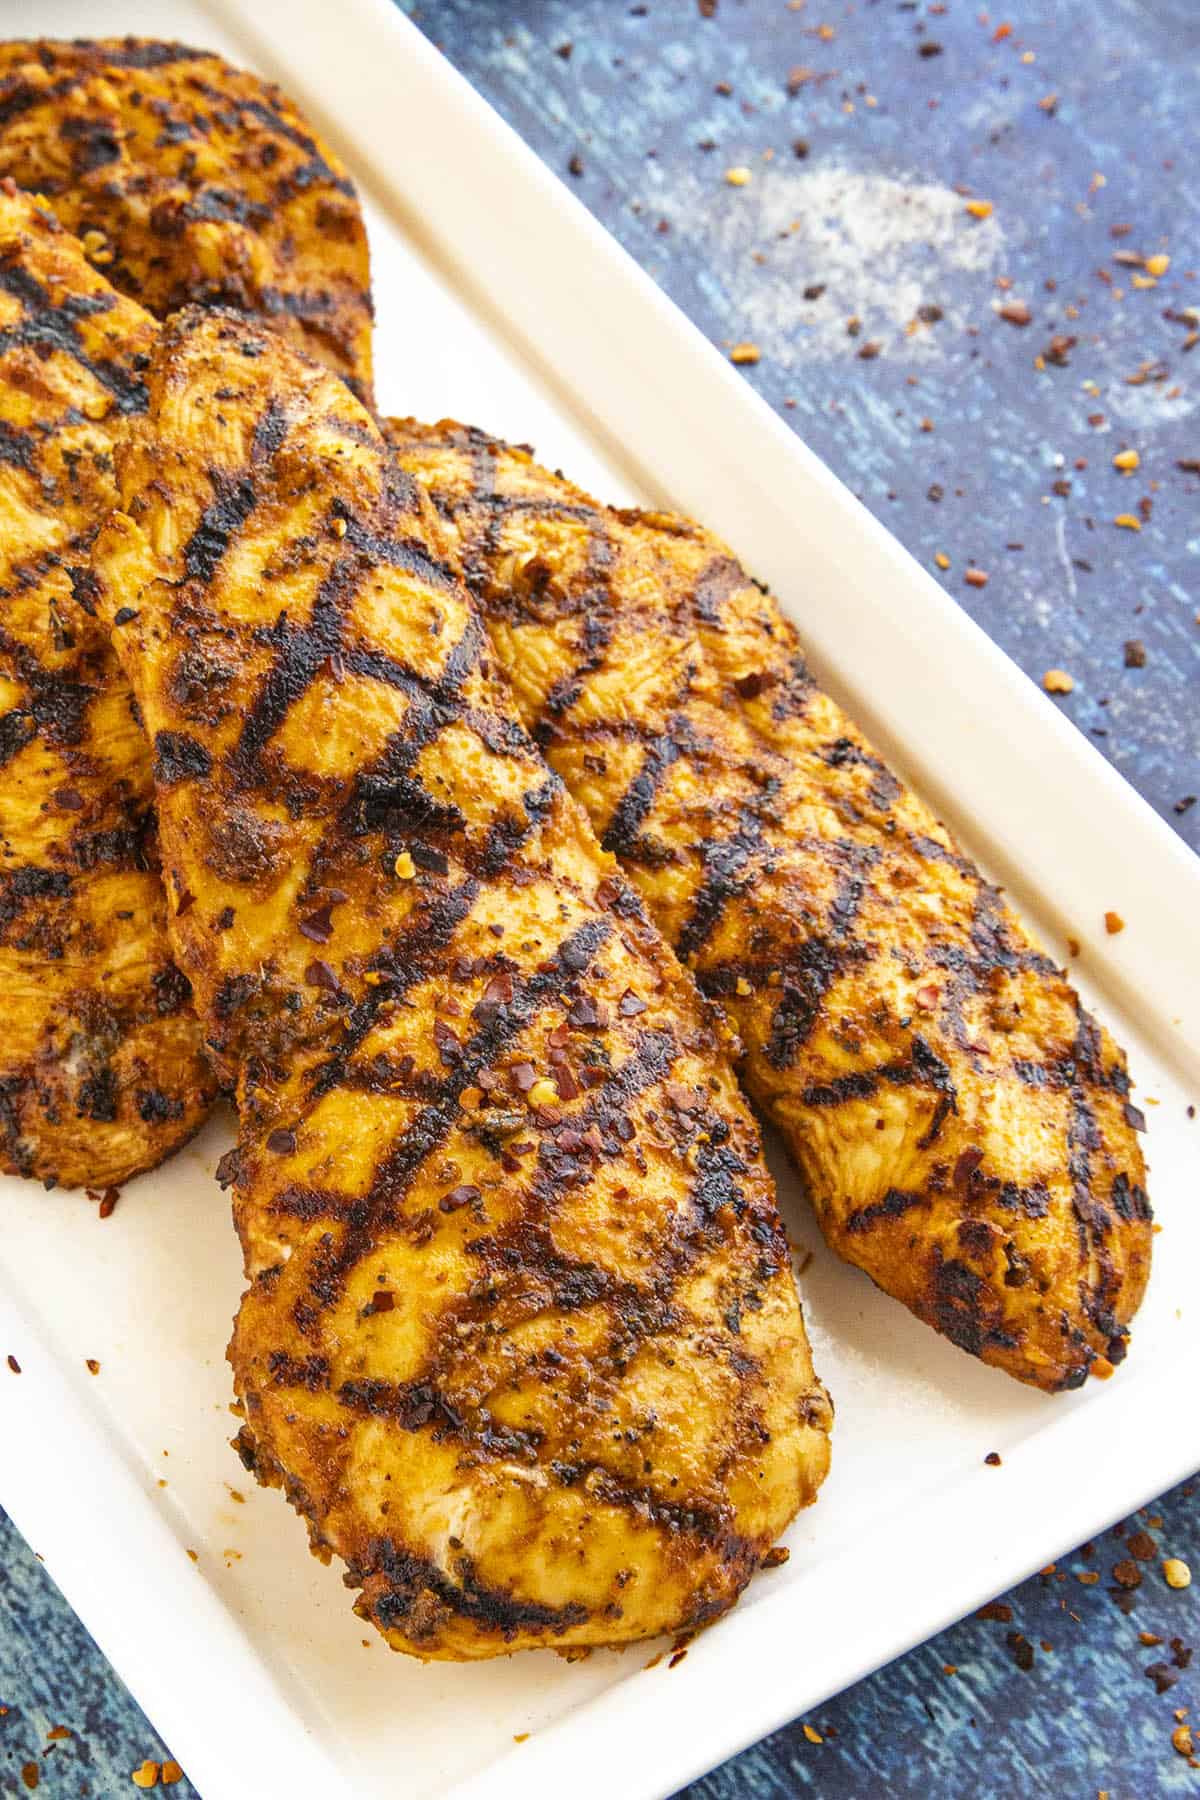 Perfectly grilled chicken on a plate, so juicy and moist from the chicken marinade